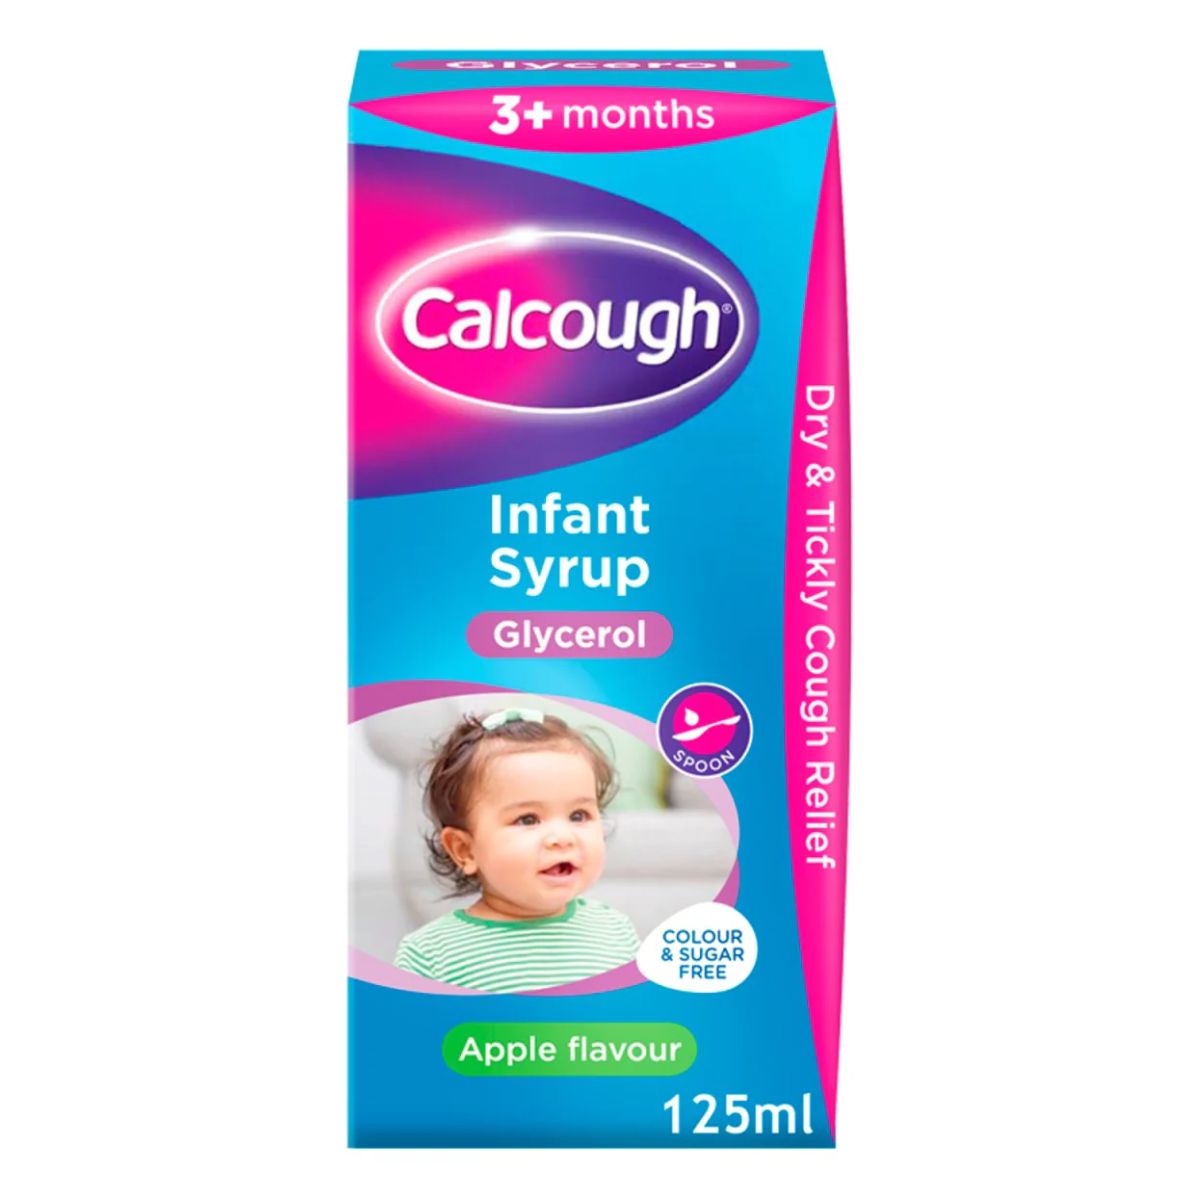 Calcough - Infant Syrup - 125ml in a bottle.